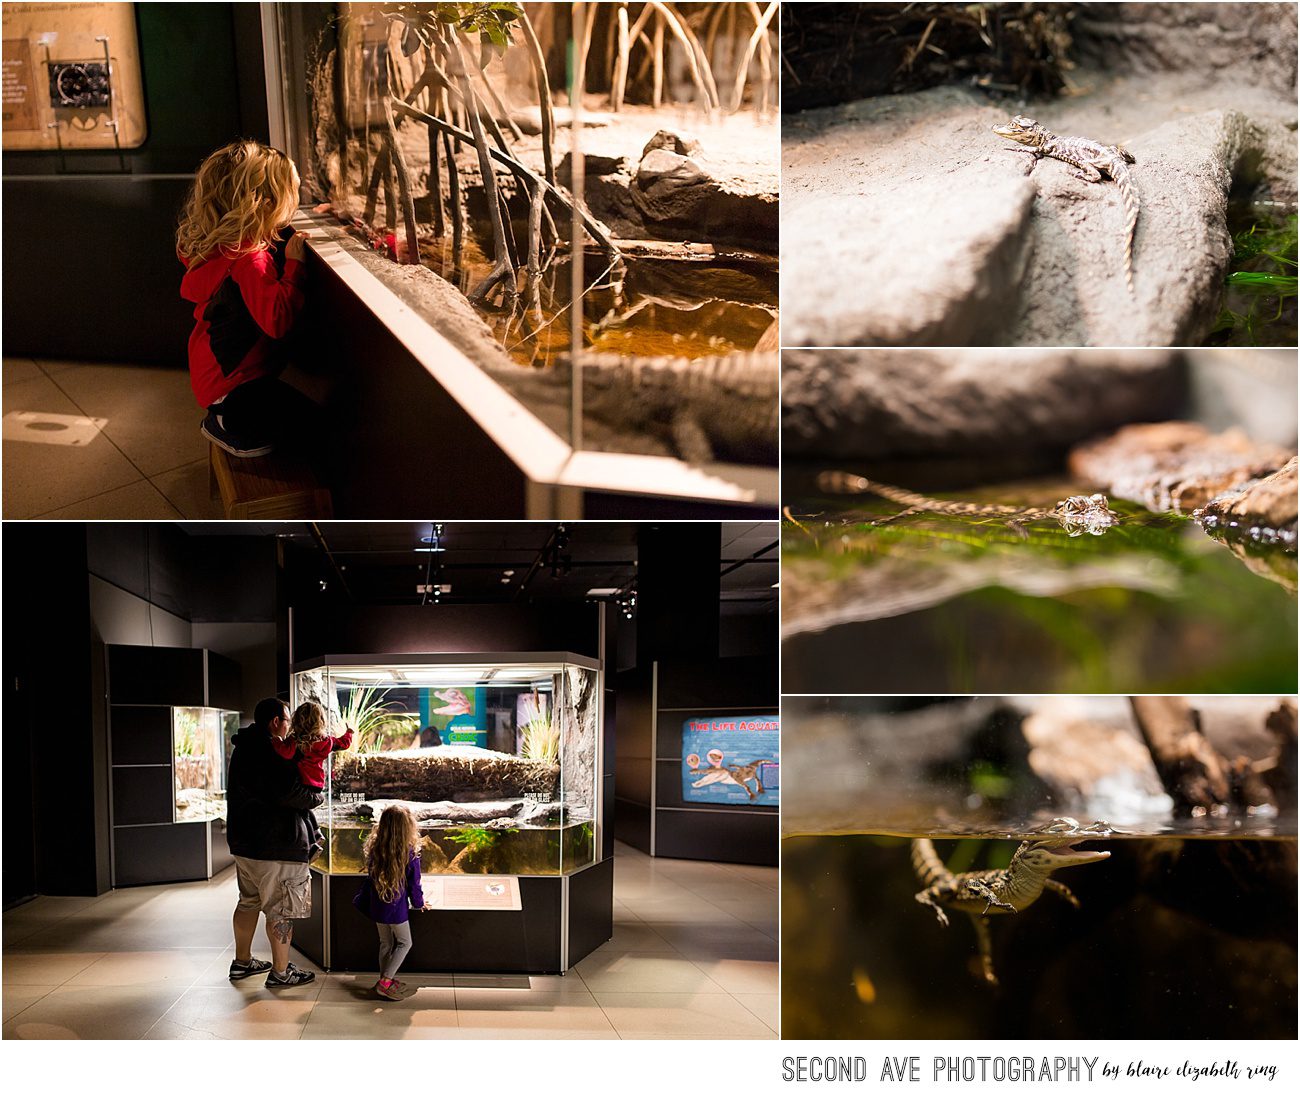 Documentary photos of the CROCS Exhibit at the National Geographic Museum in Washington, DC.